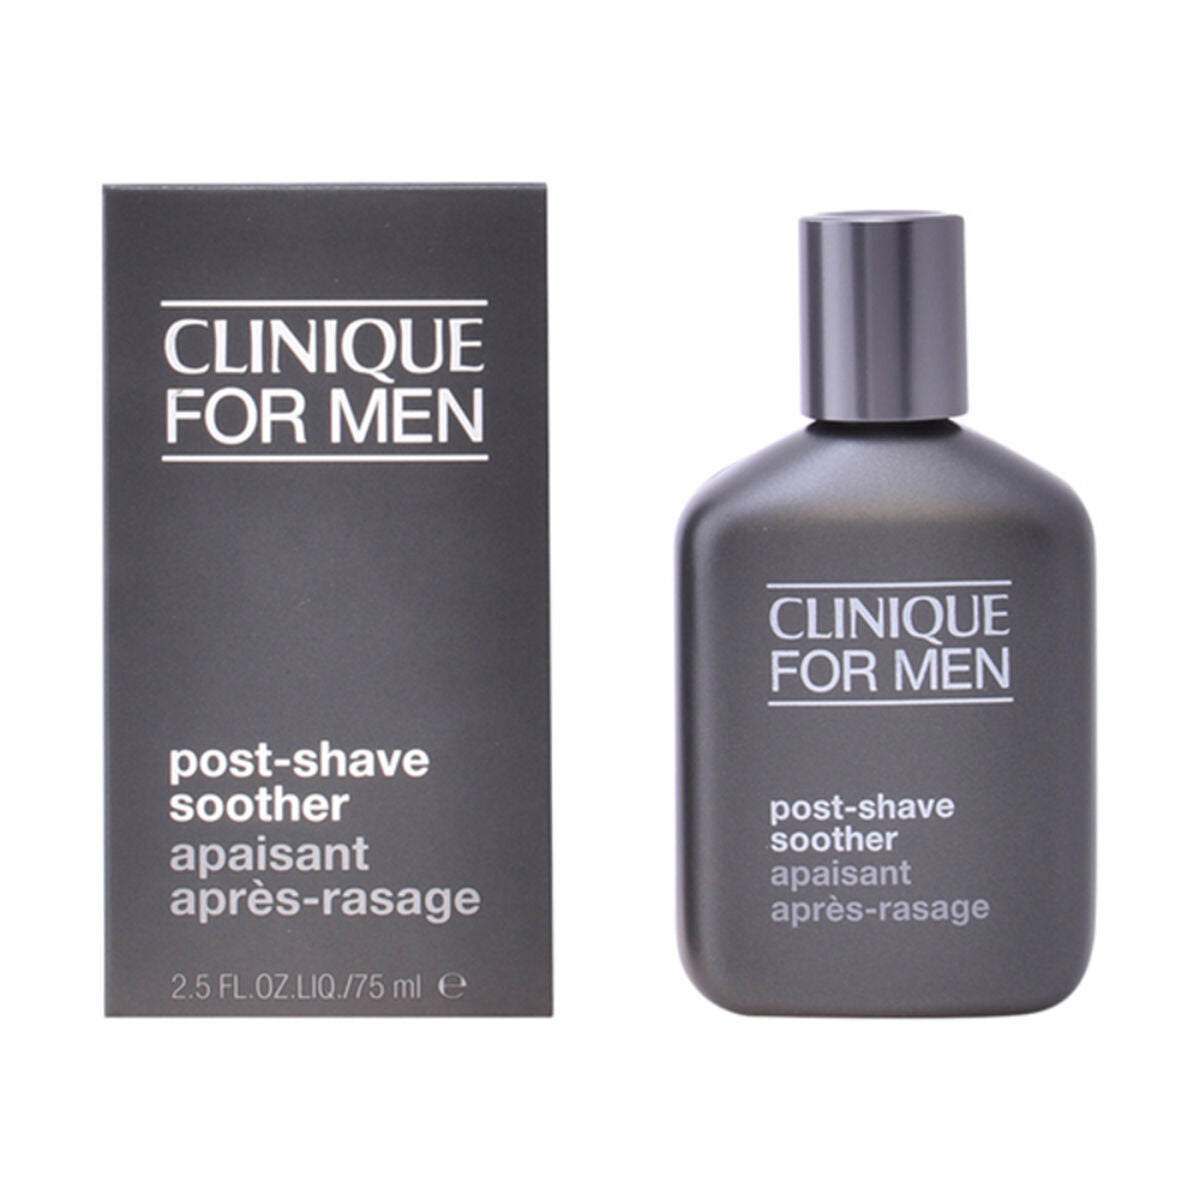 Afterbove muži Clinique 75 ml